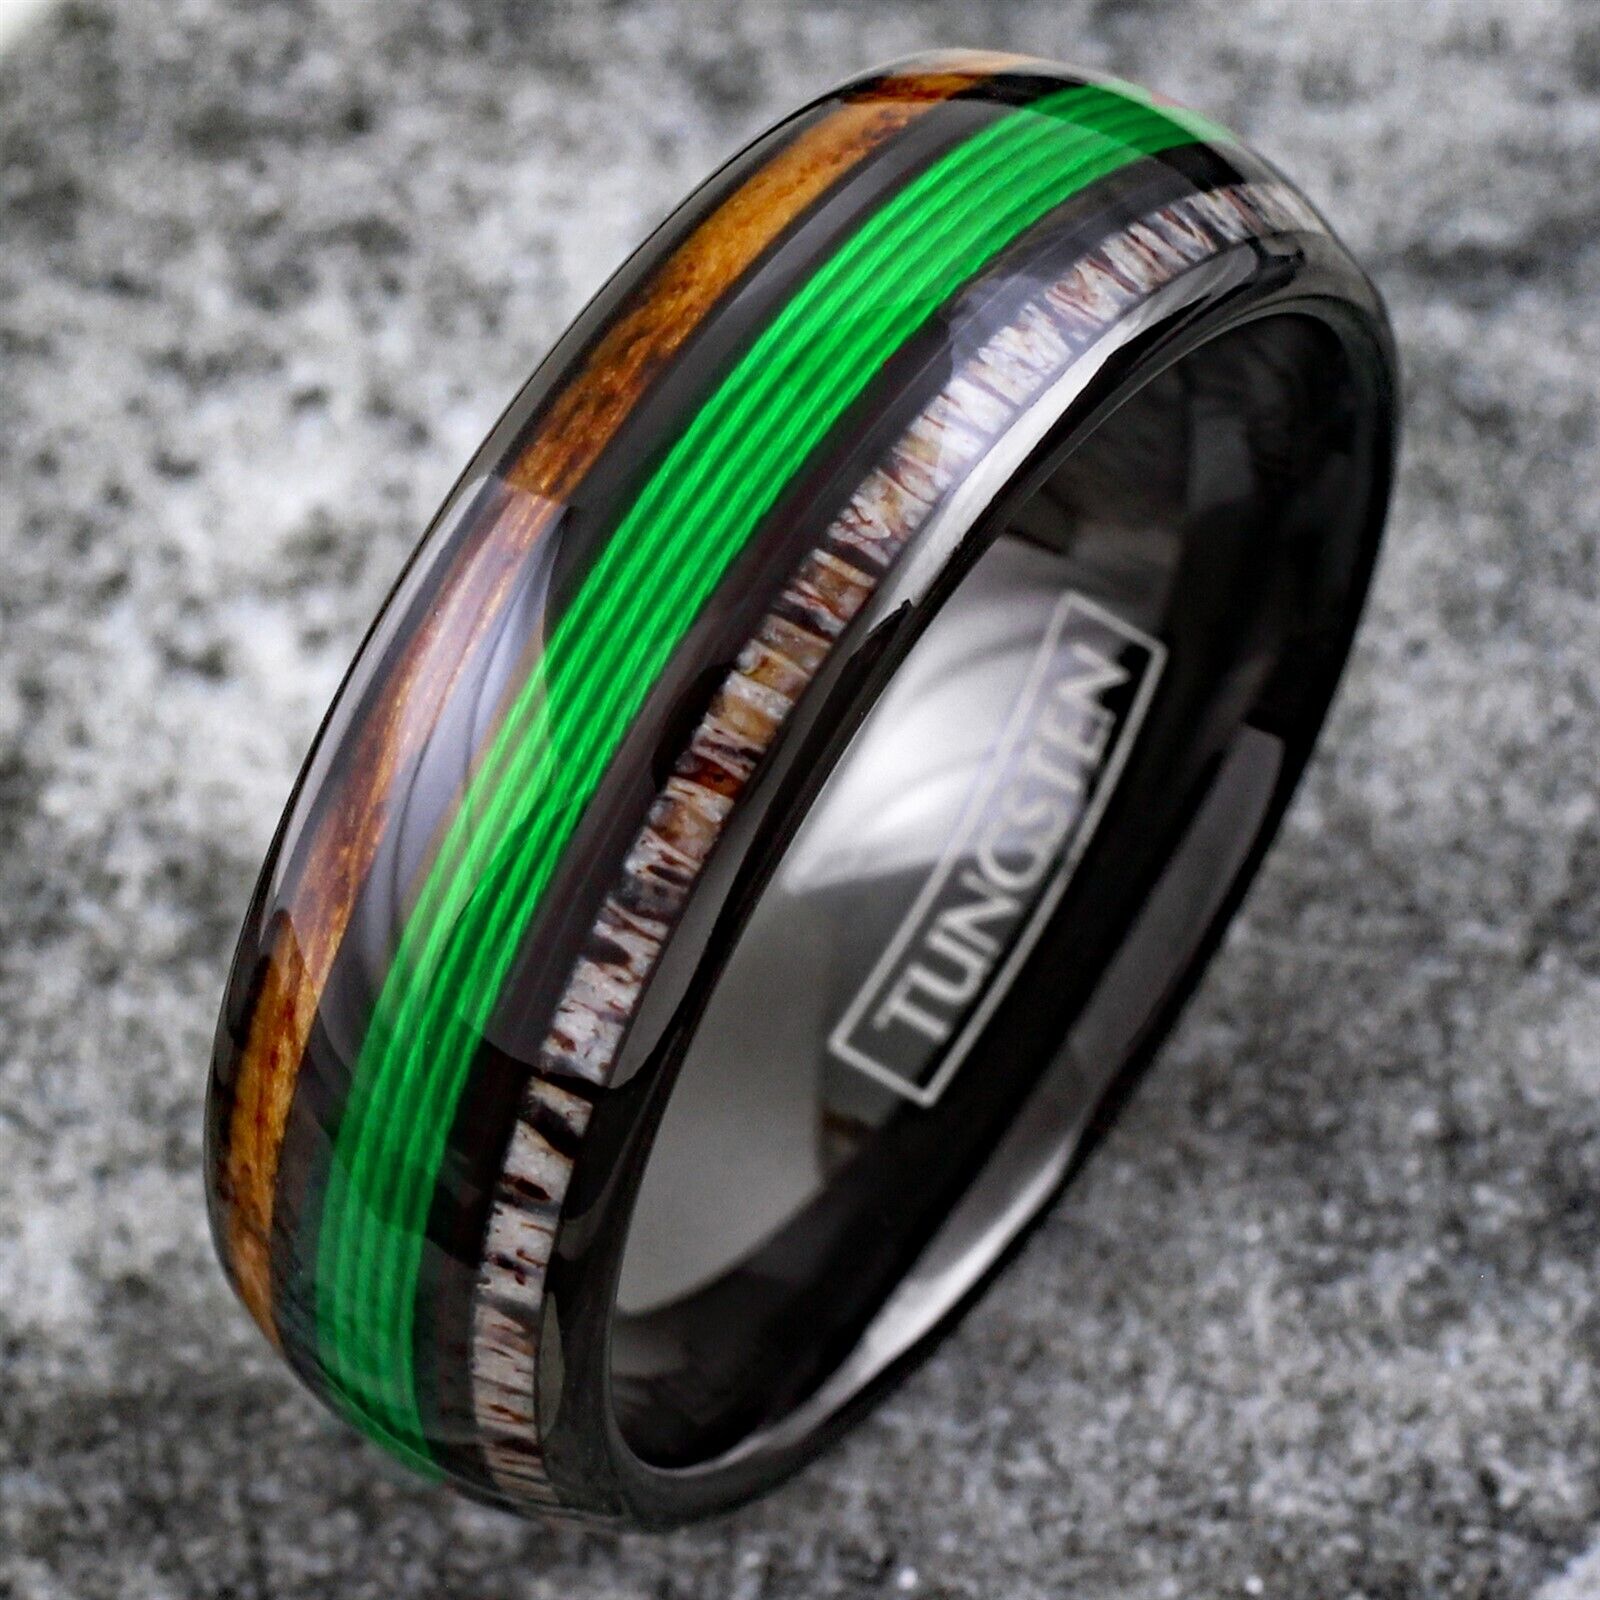 Stunning Polished Black Tungsten Low Dome Ring with Glorious GREEN Real  Fishing Line Between Whiskey Barrel Oak Wood and Deer Antler Inlays.